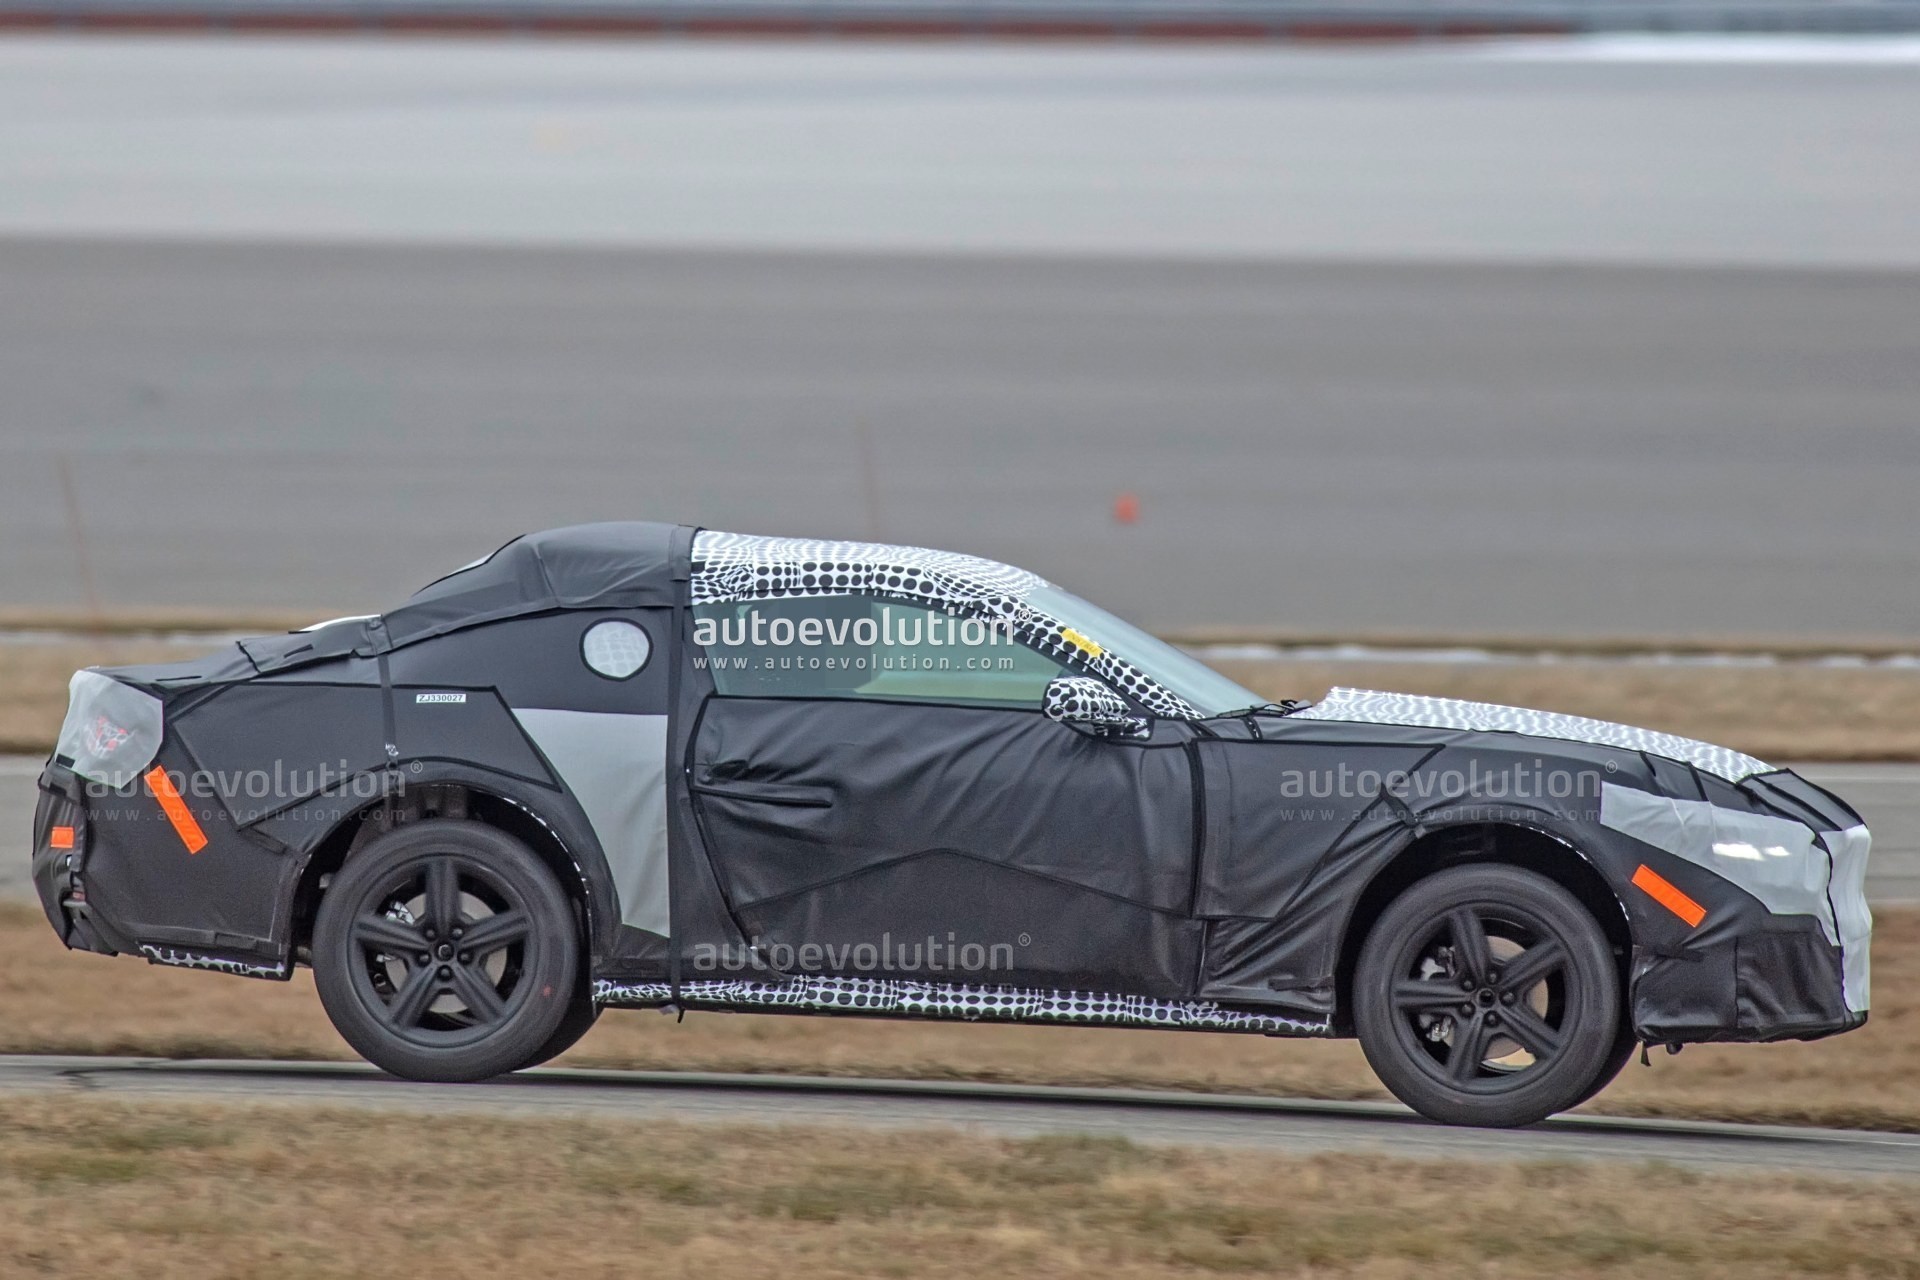 Ford Leaks About the 2024 Mustang Hybrid Powertrain Suggest Exciting